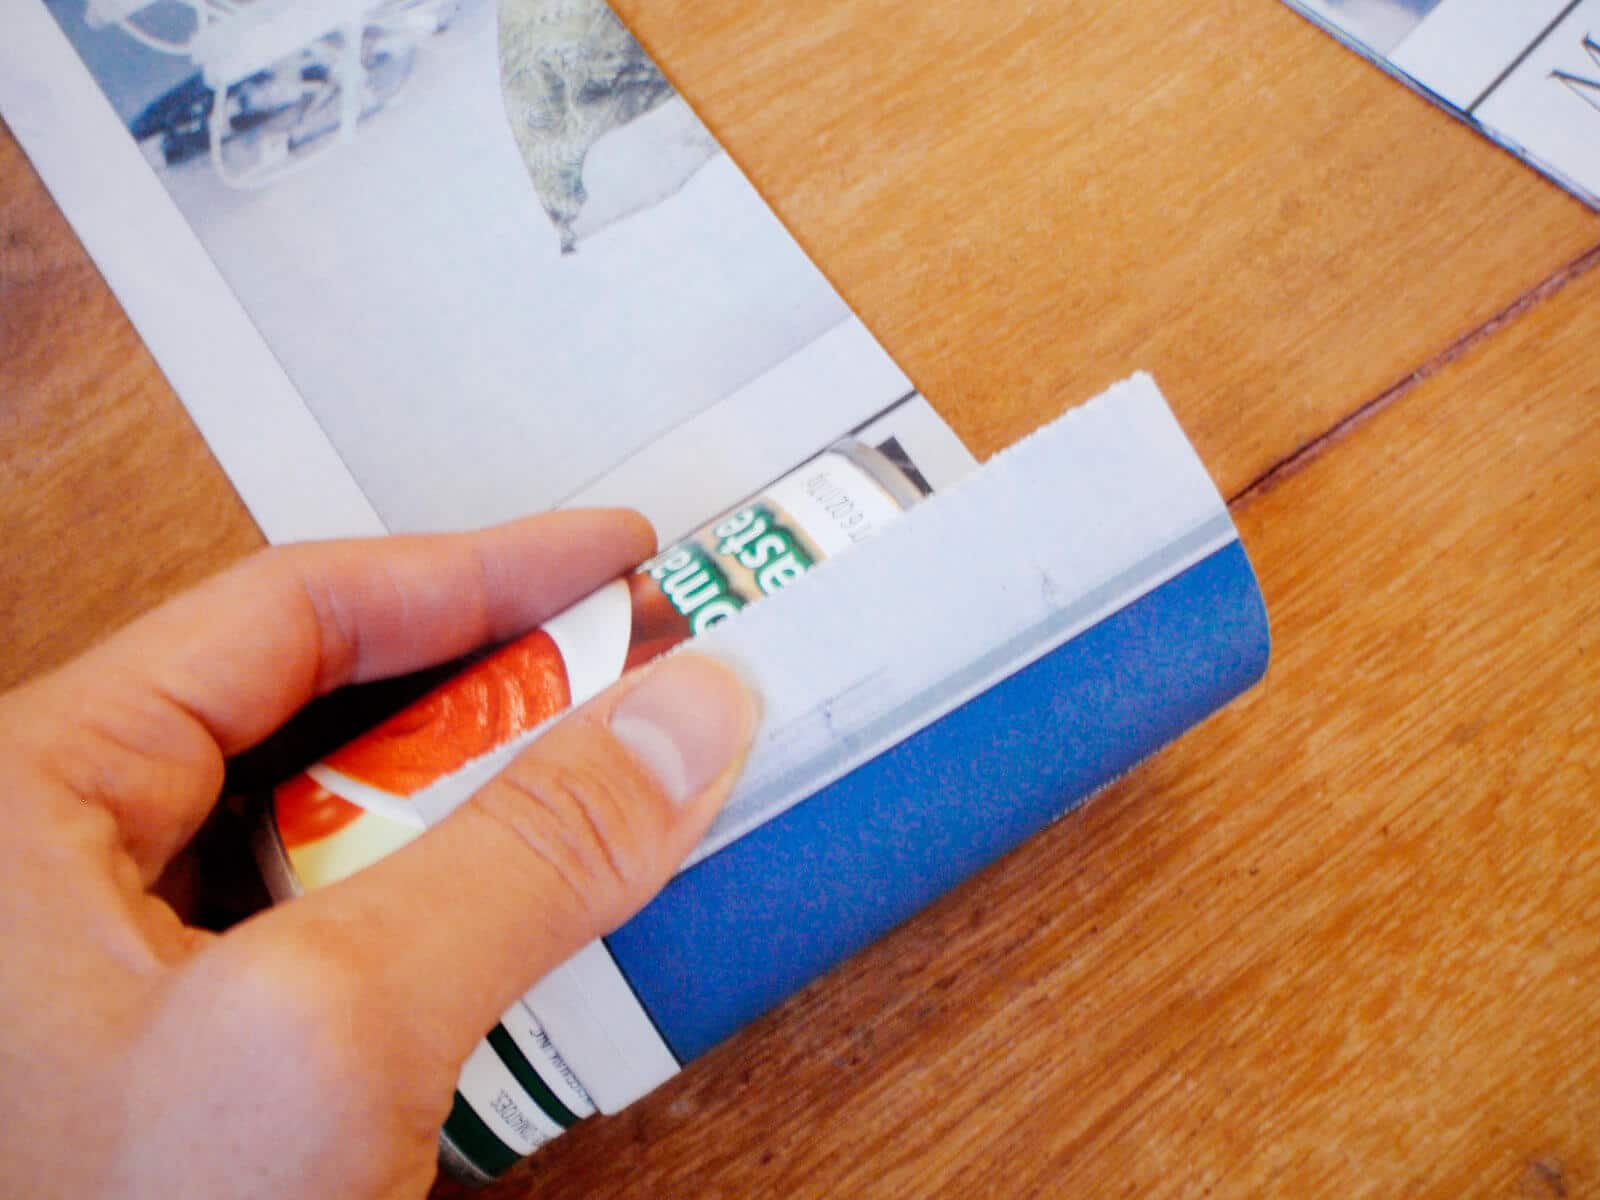 Roll the can along the newspaper away from you until it's wrapped all the way around